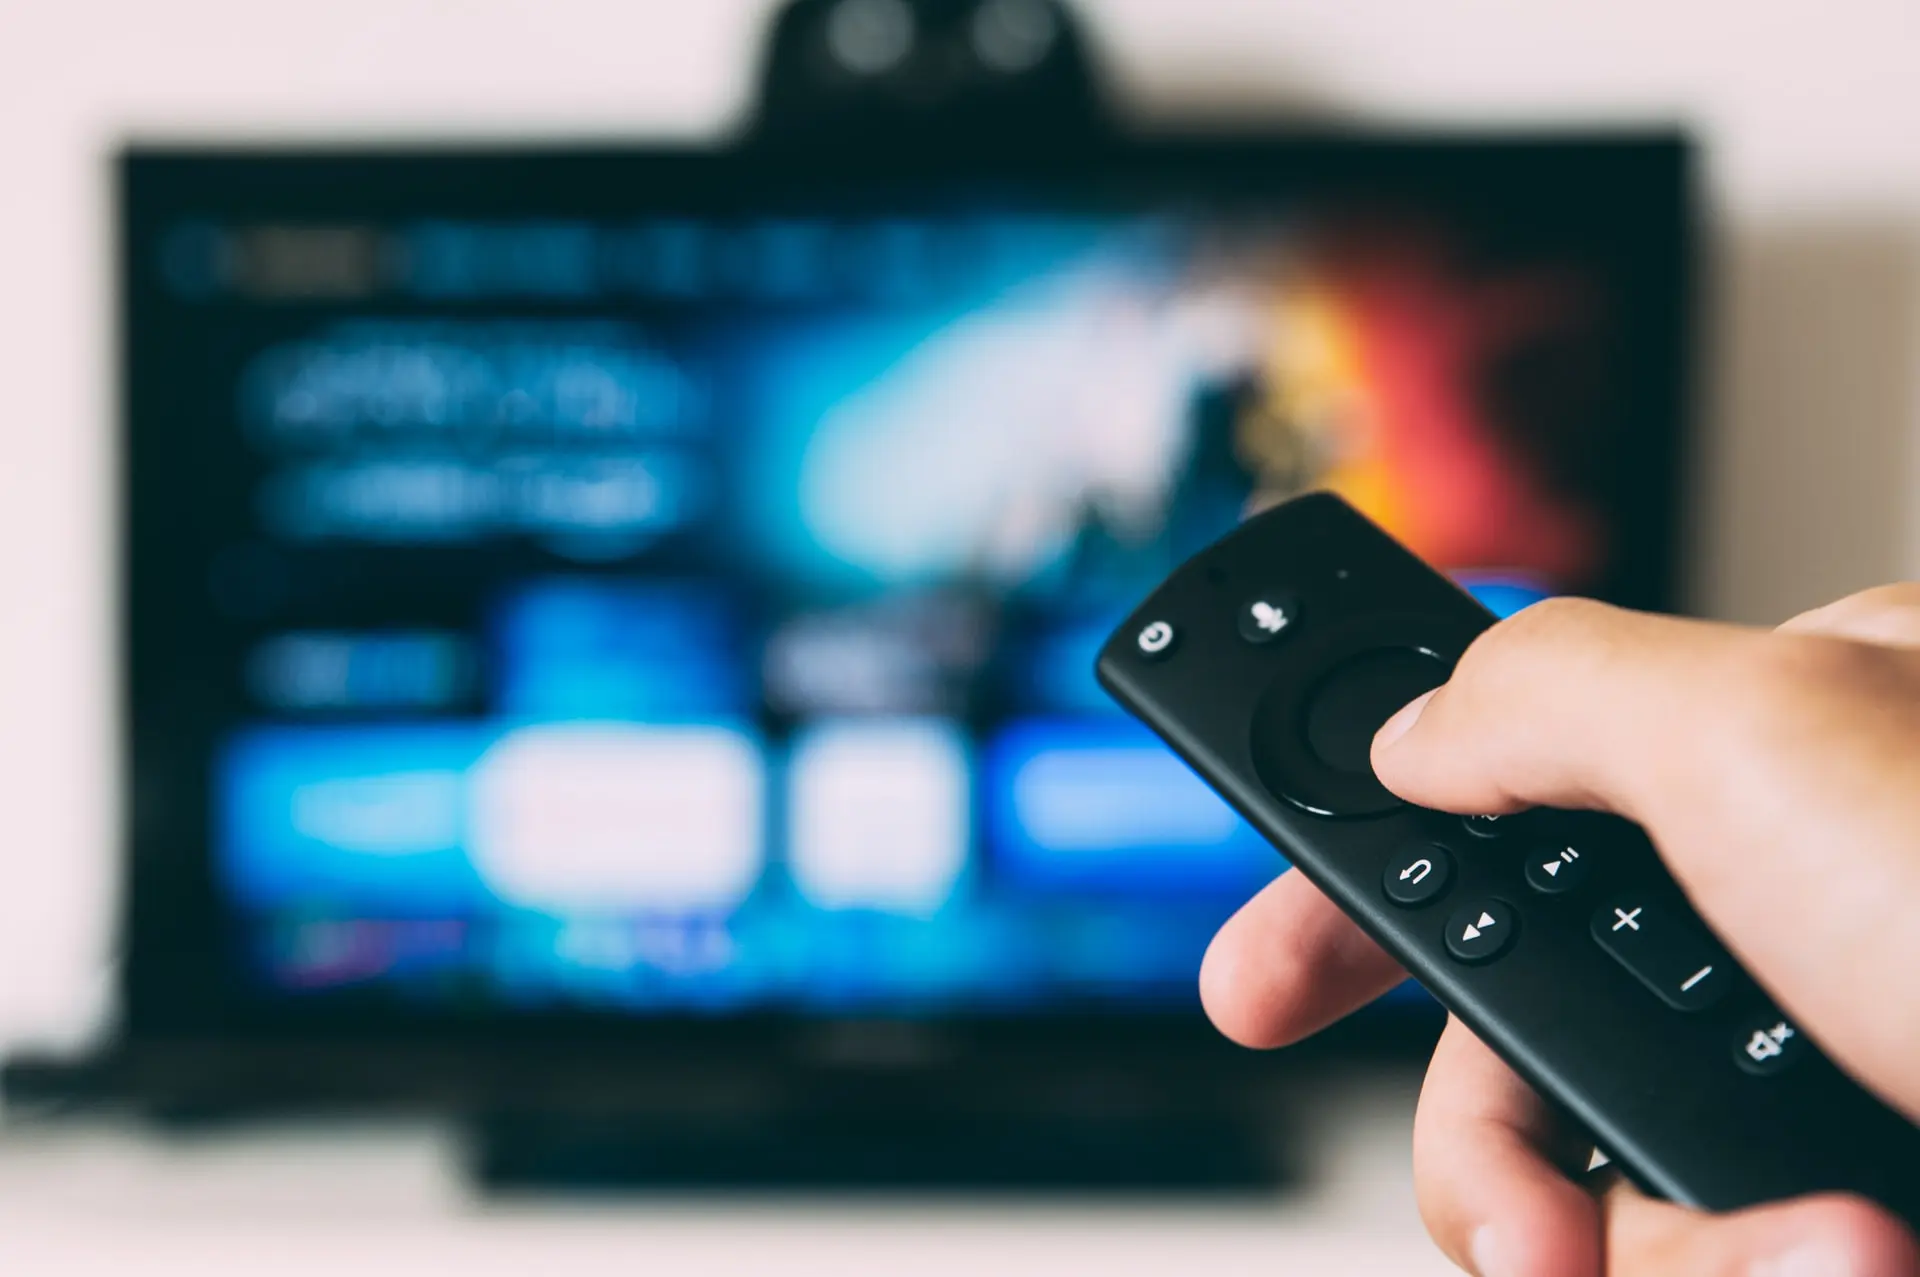 EU Commission promotes the development of new image compression method codec which aims to increase quality and reduce data volume in video streaming